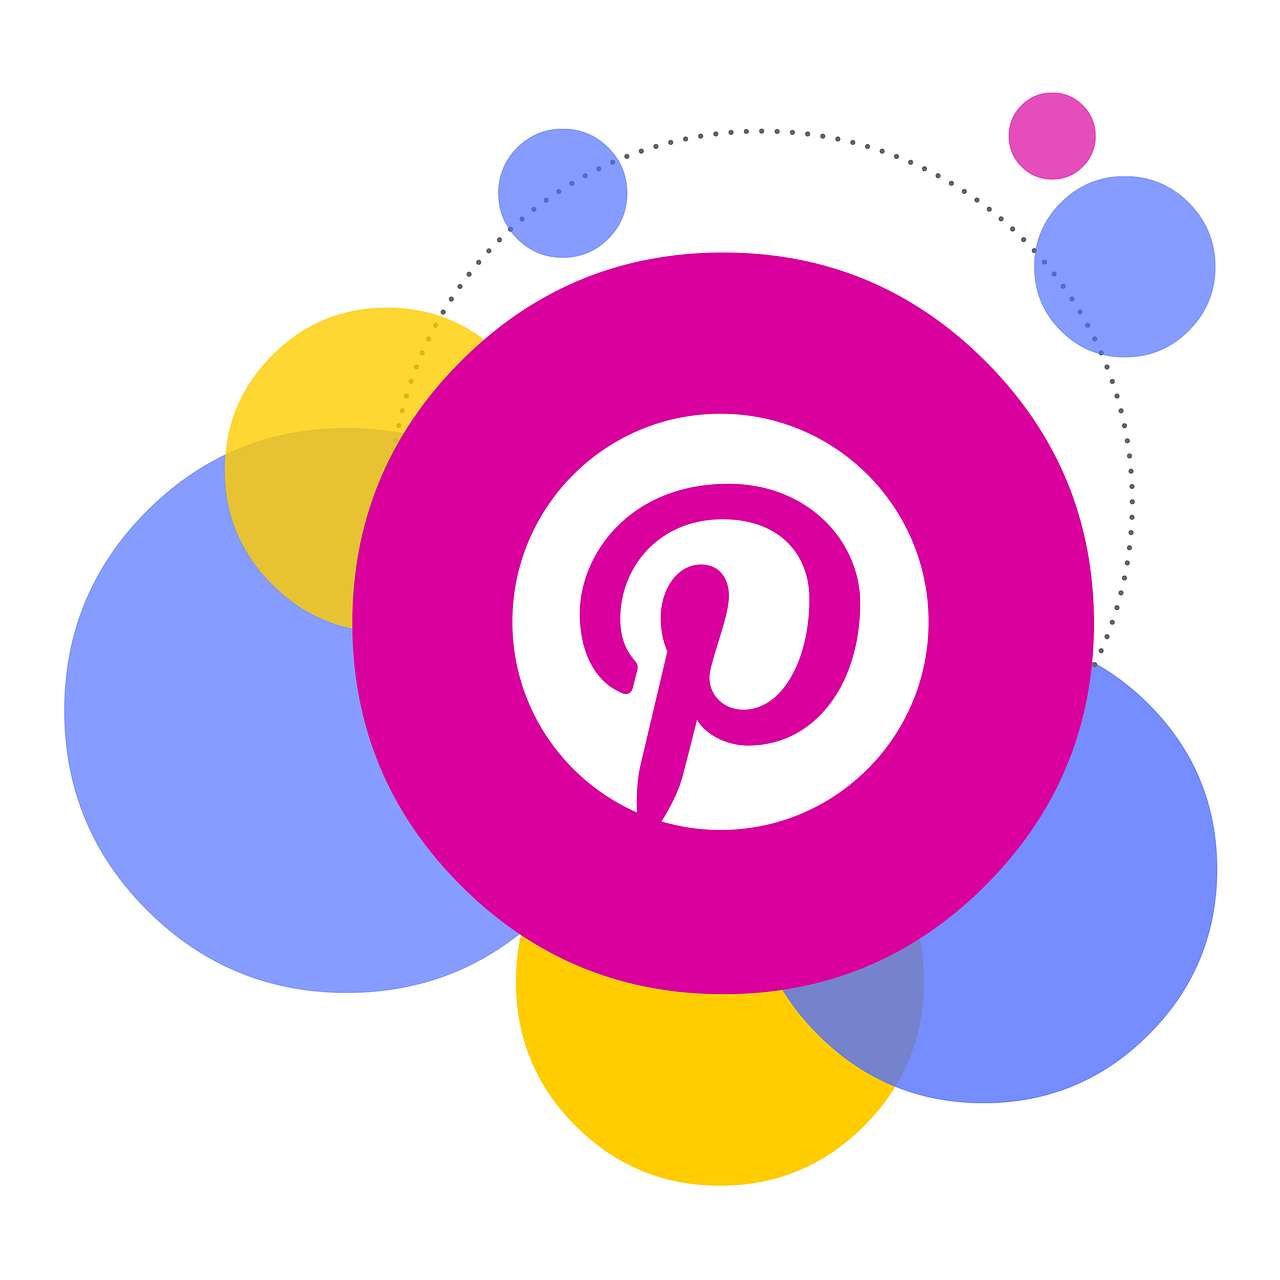 How to download an image on pinterest?